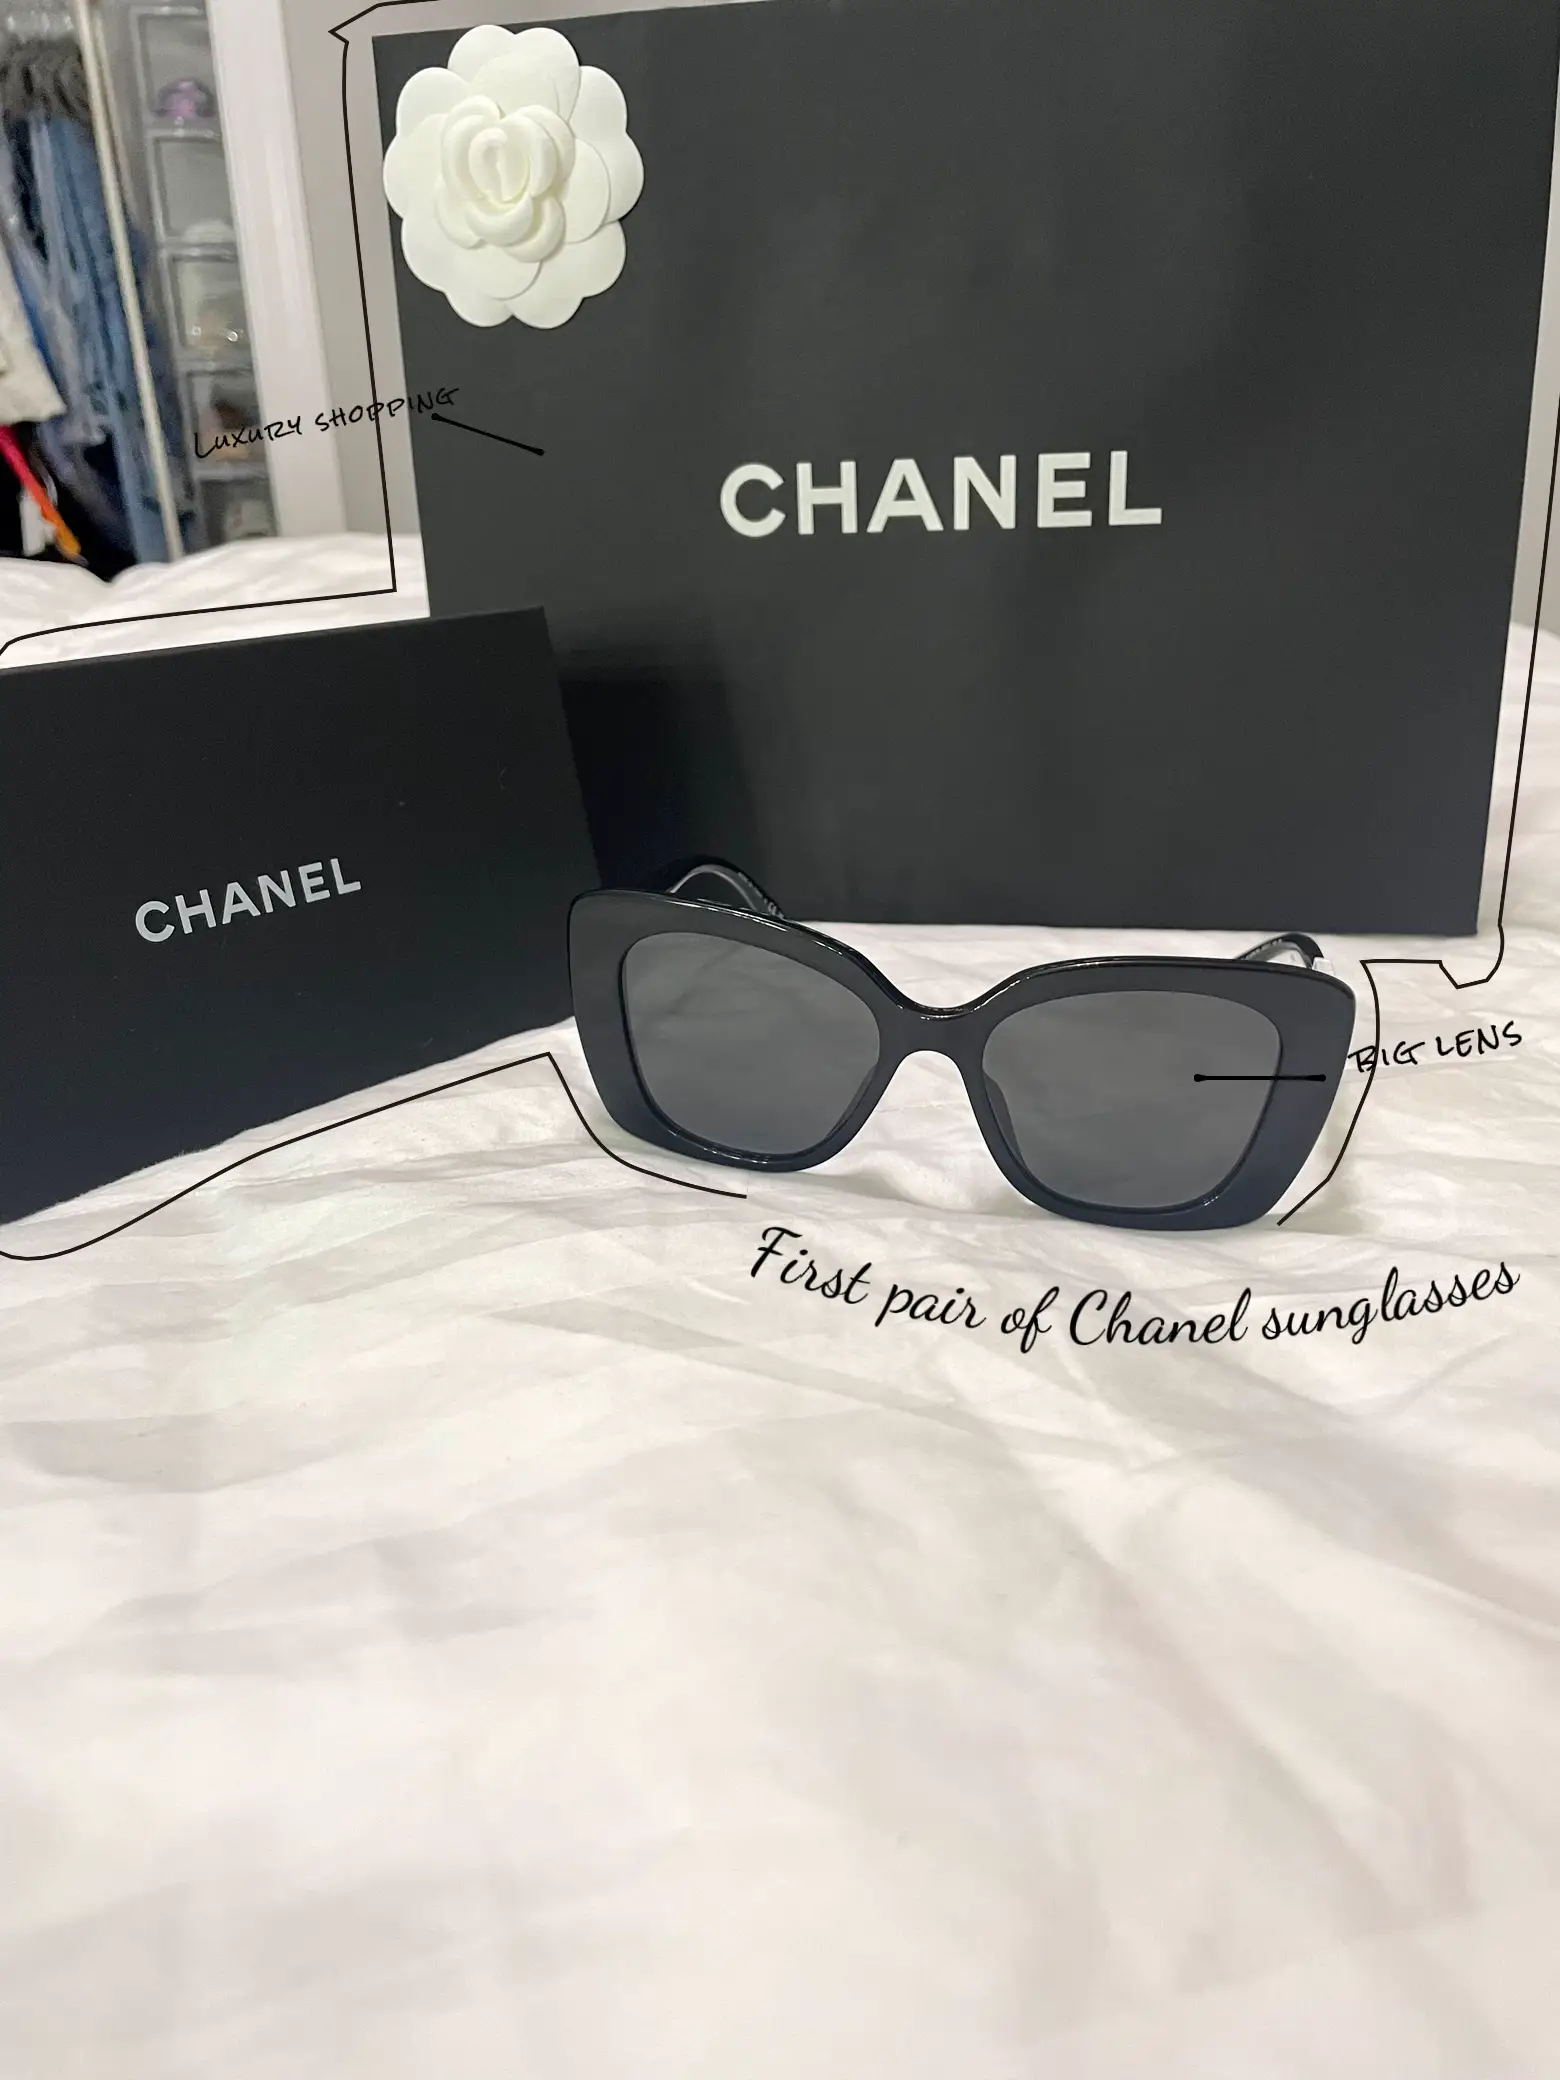 Show Stopping Sunnies: Chanel Review, Gallery posted by Mia DeLuca